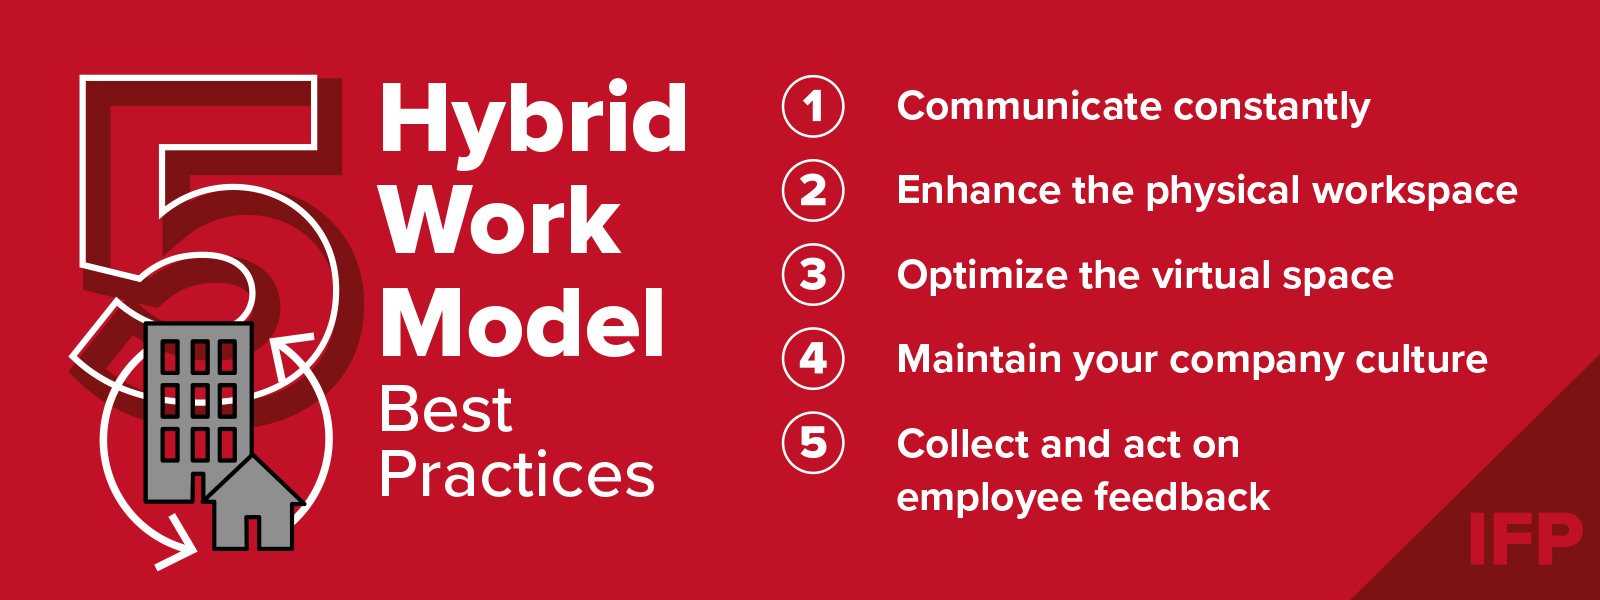 IFP visual on the 5 ways businesses can build a winning hybrid work culture